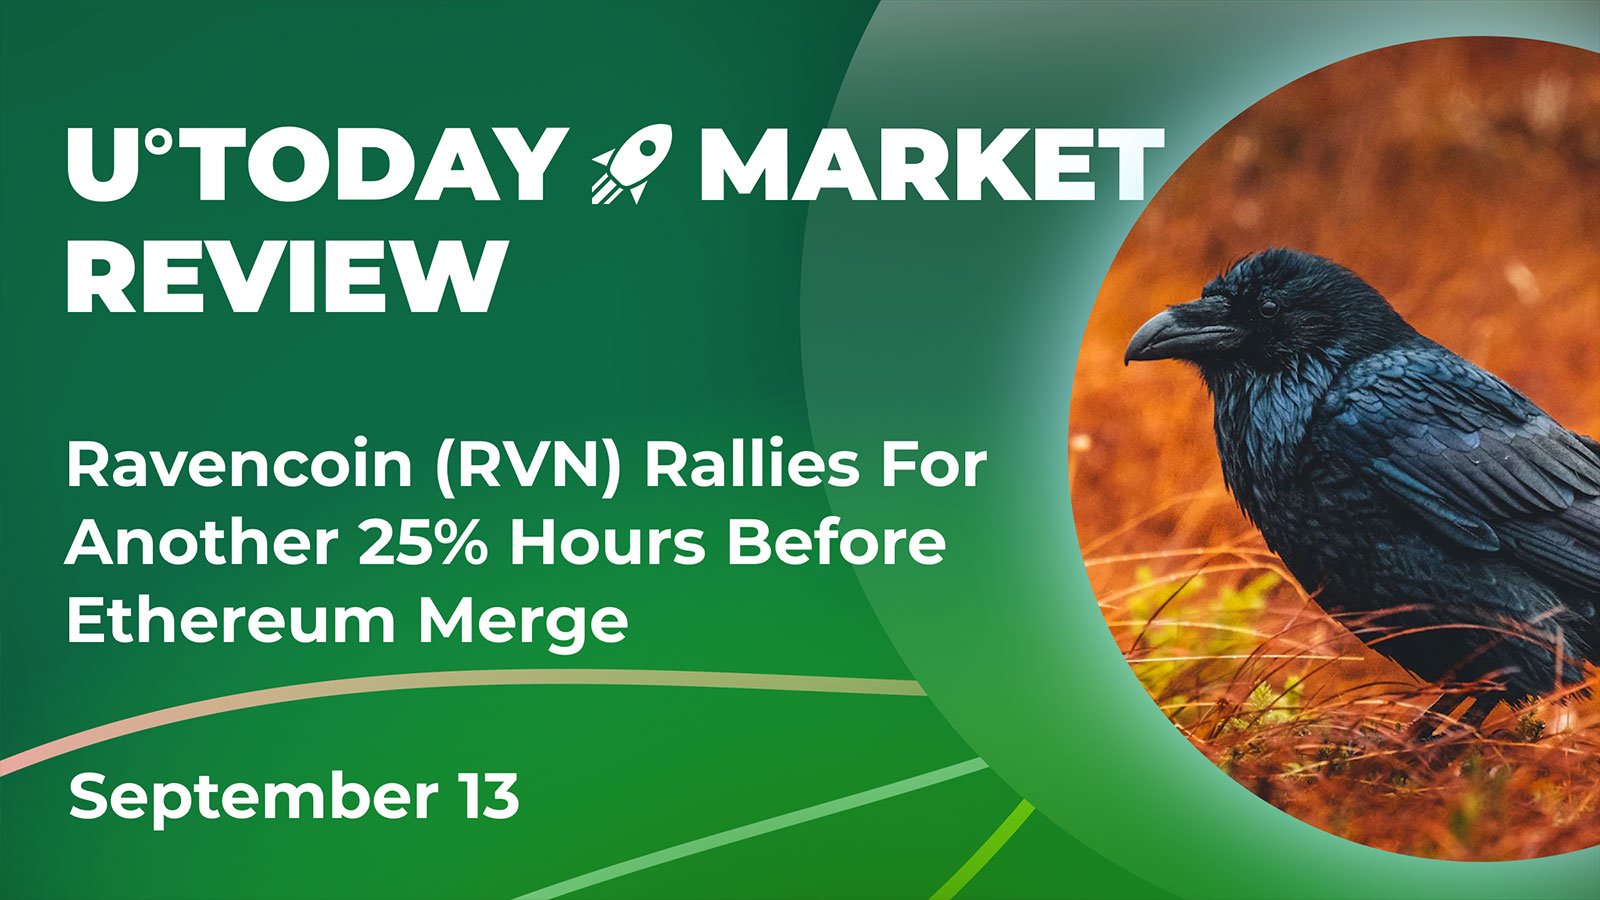 Ravencoin (RVN) Rallies For Another 25% Hours Before Ethereum Merge: Crypto Market Review, September 13